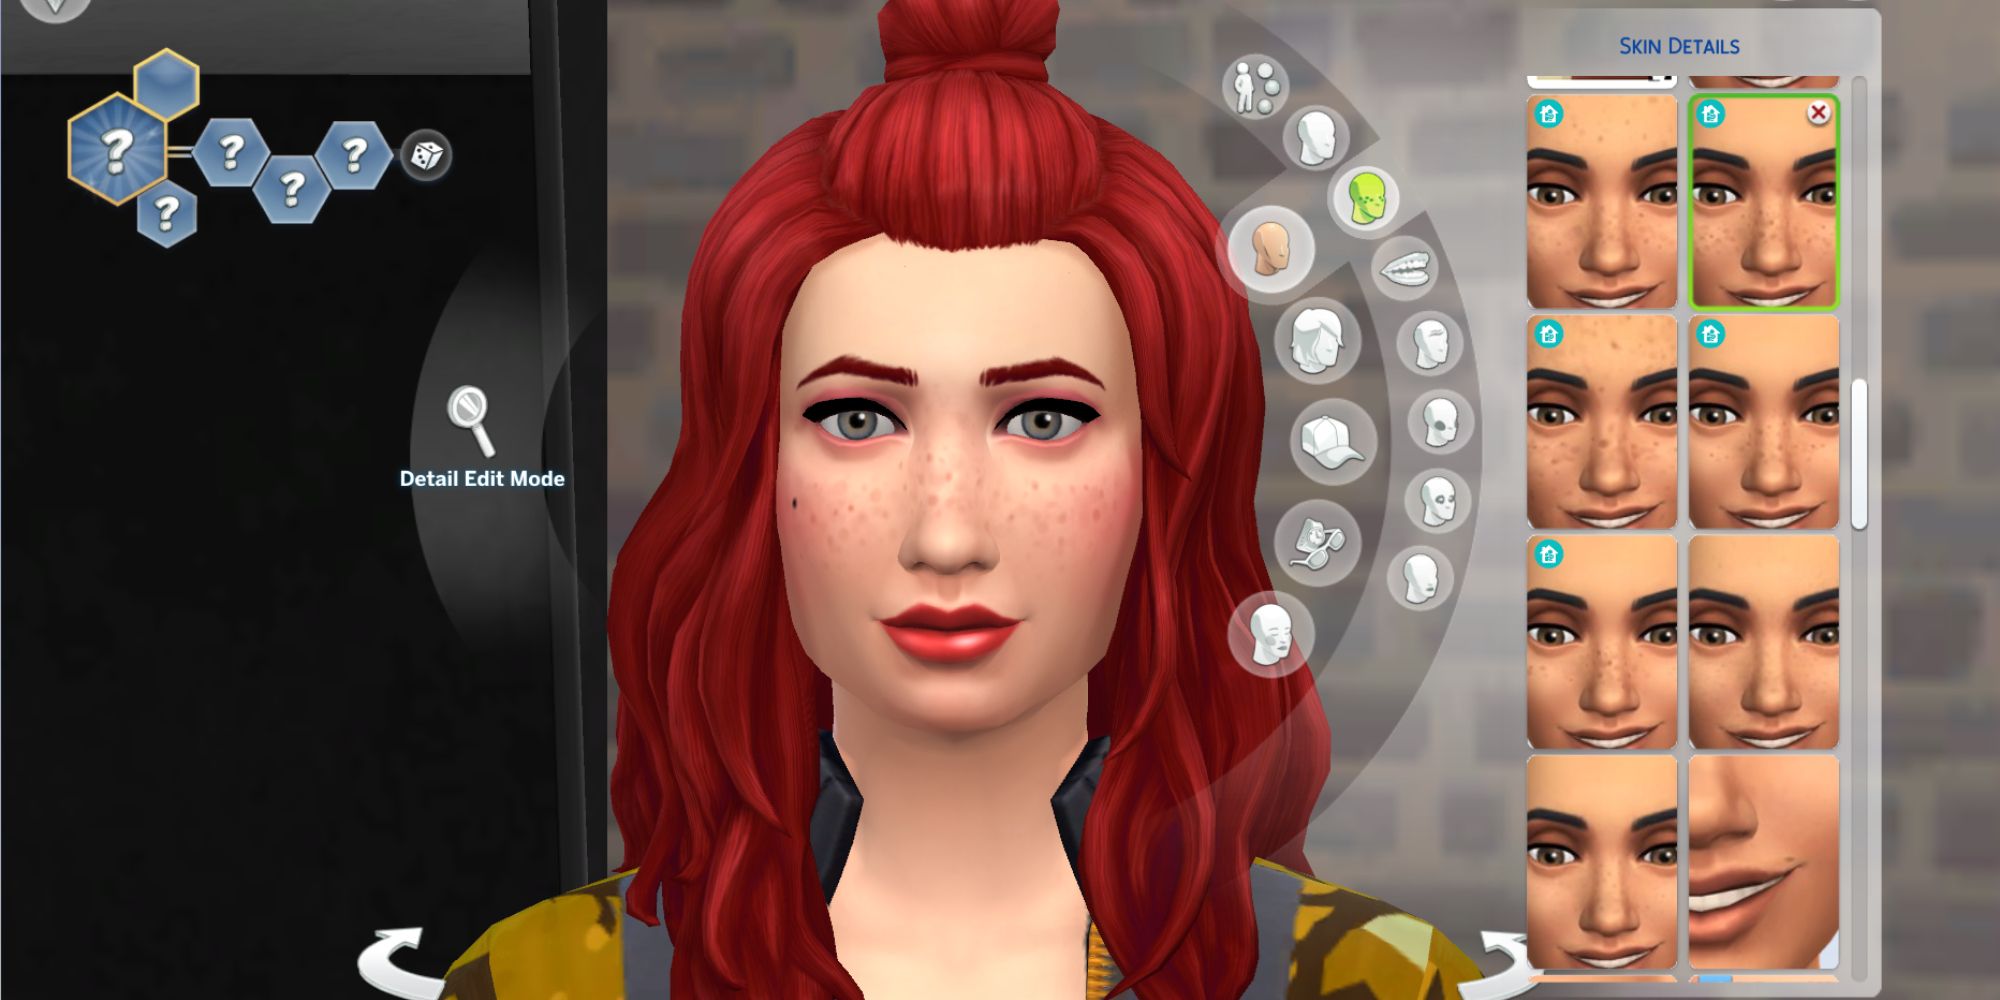 Use face details like freckles, moles, acne, or birthmarks to create unique looking Sims and break same face syndrome